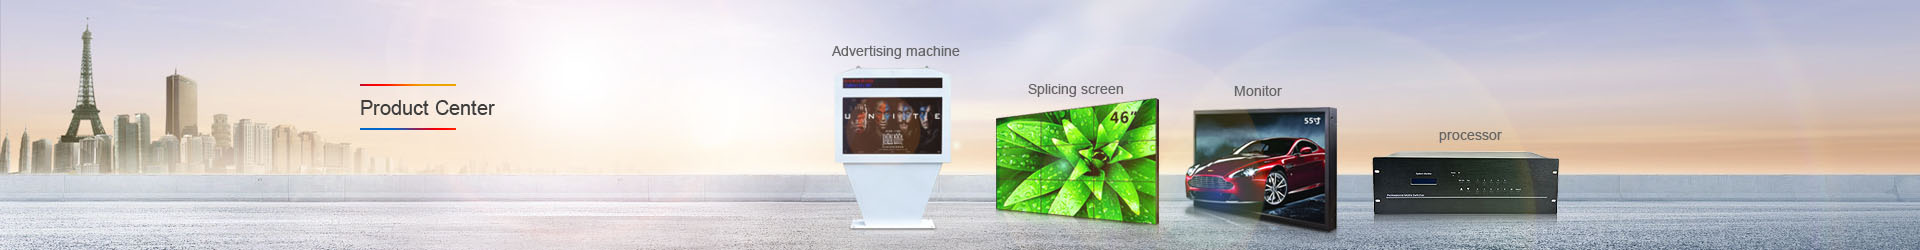 86 inch video conference all-in-one machine